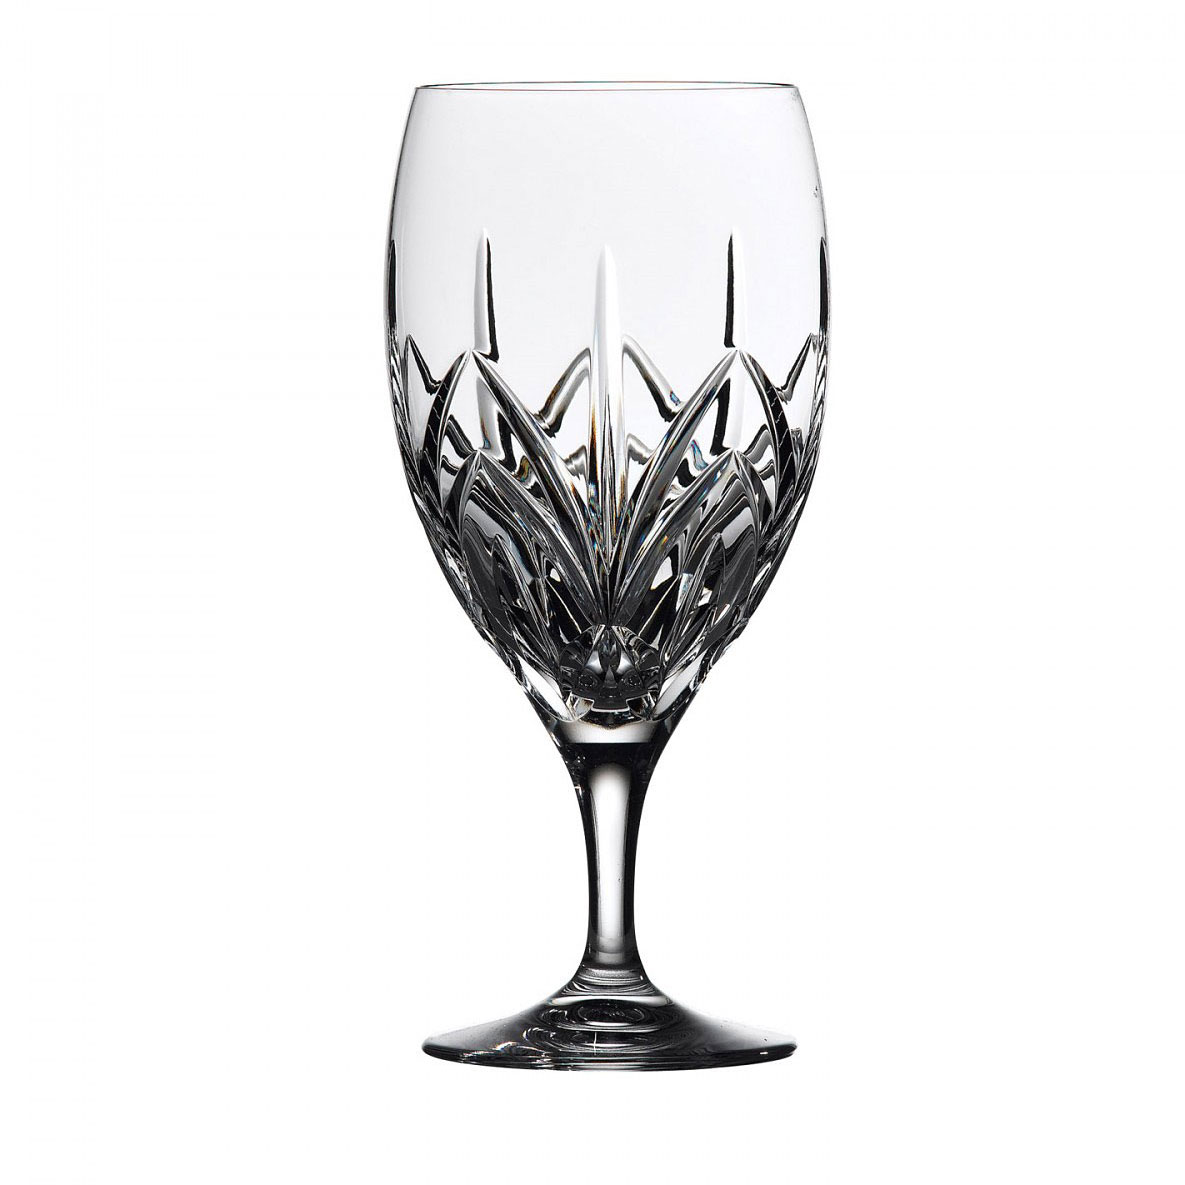 Marquis by Waterford Crystal, Caprice Crystal Iced Beverage, Single